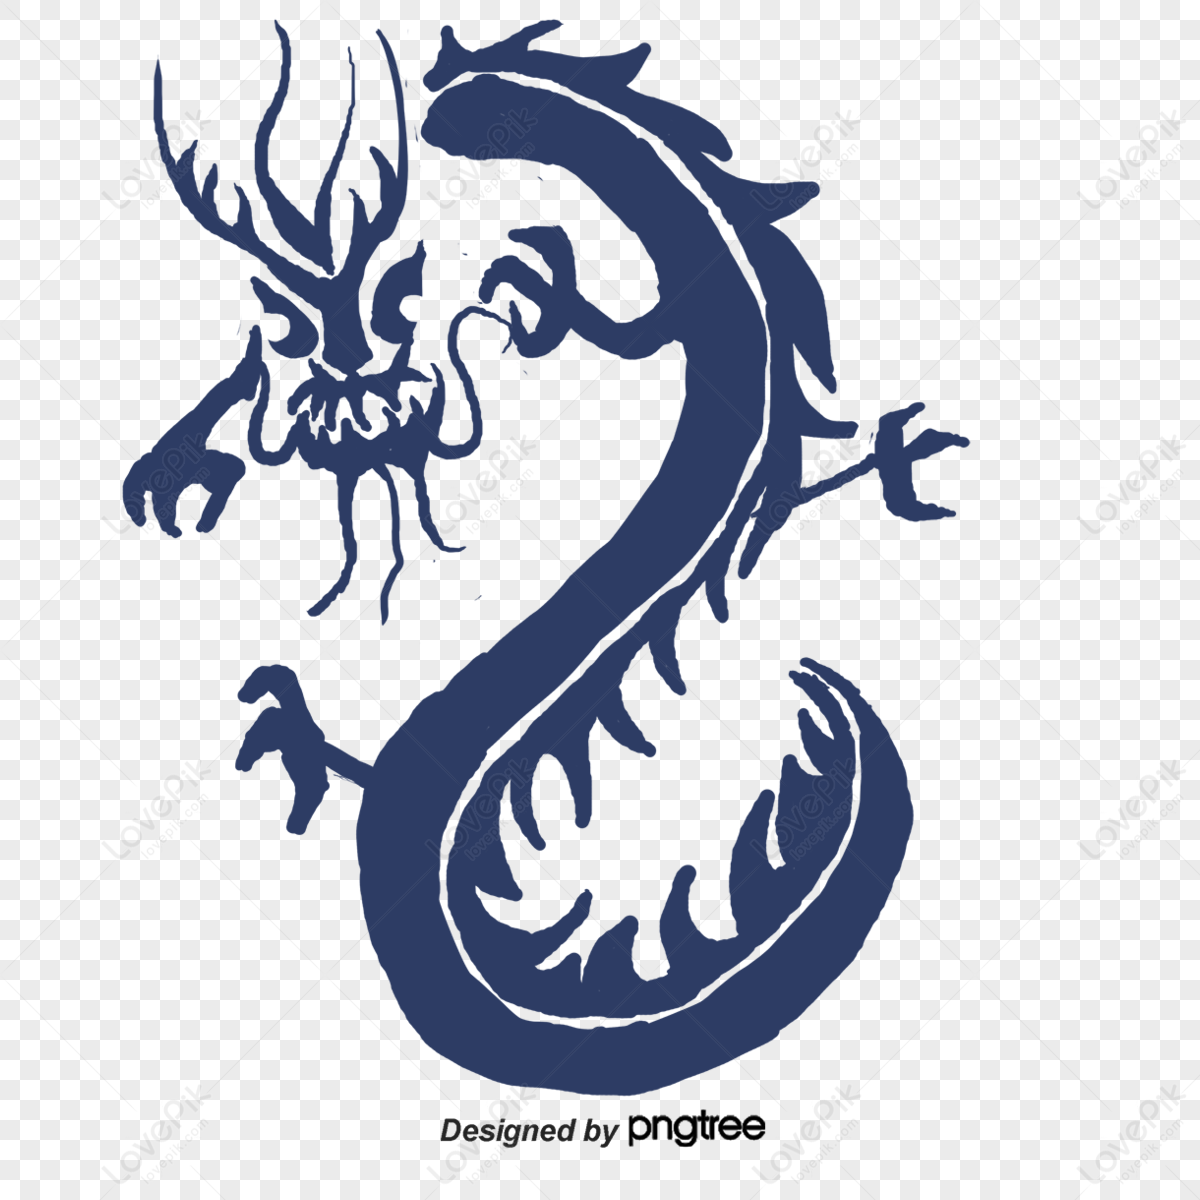 Dragon Tattoo Design, Vintage Engraved Vector Illustration. Dragon Tattoo  Symbol Chinese Design And Dragon Tattoo Art Culture. Dragon Tattoo Black  Ancient Decoration. Traditional Asian Fantasy Icon. Royalty Free SVG,  Cliparts, Vectors, and